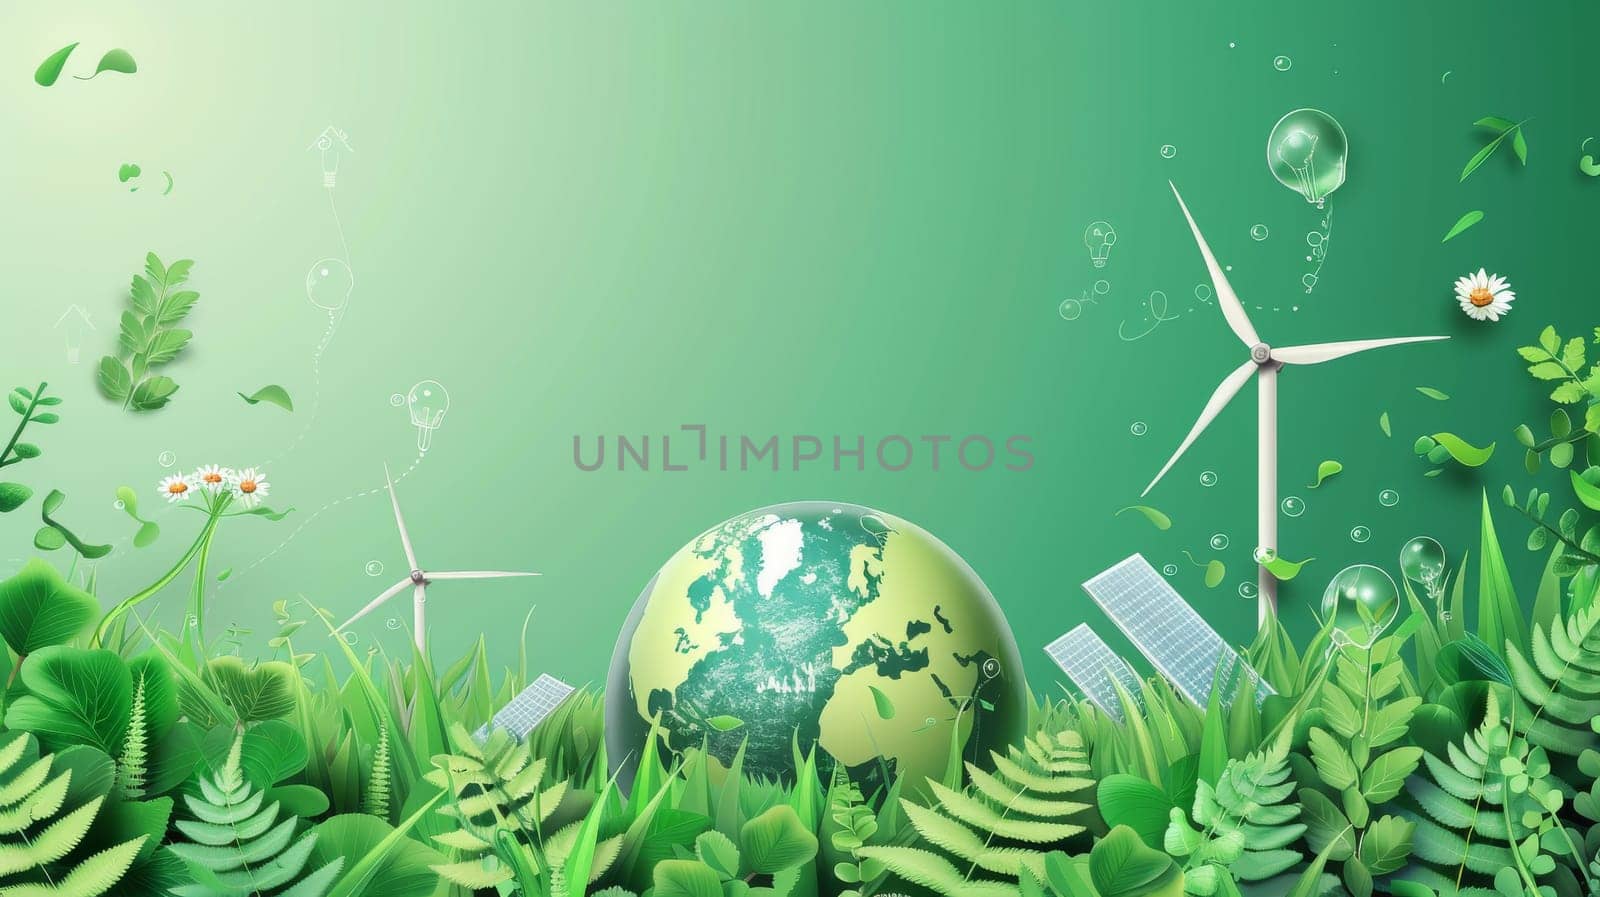 Conceptual background modern depicting Earth Day, the globe, recycling symbol, windmill, solar cell and environmental friendly graphics for a banner, campaign, post, website, and social media. Save